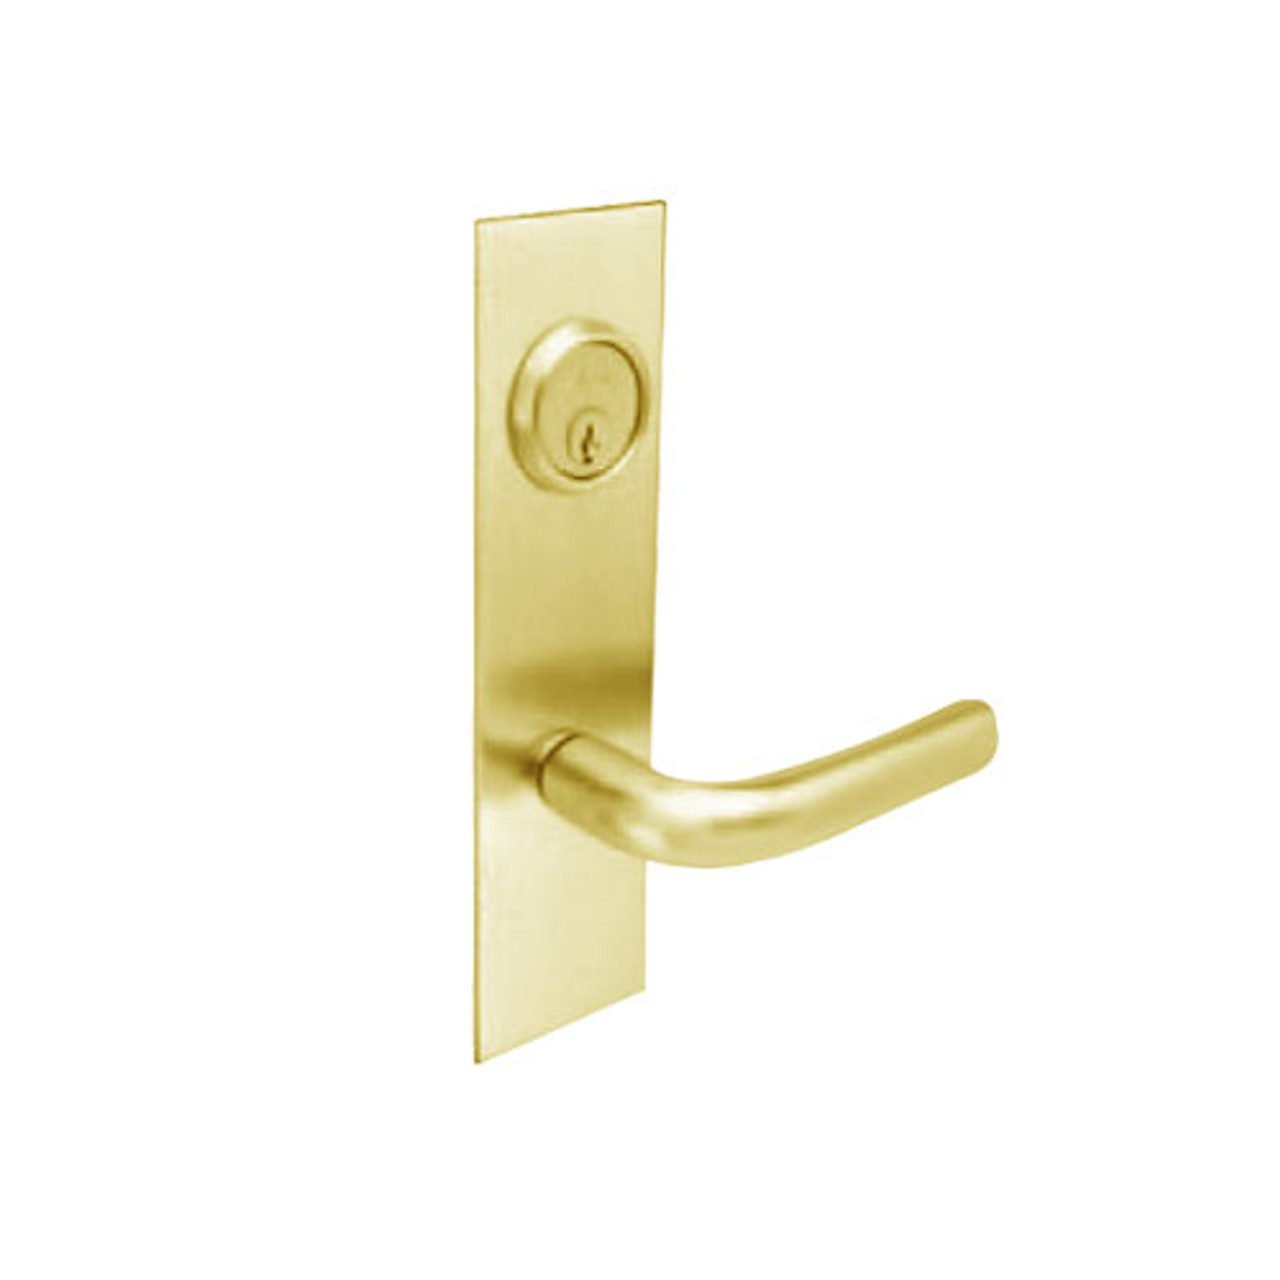 BM37-NH-04 Arrow Mortise Lock BM Series Classroom Lever with Neo Design and H Escutcheon in Satin Brass